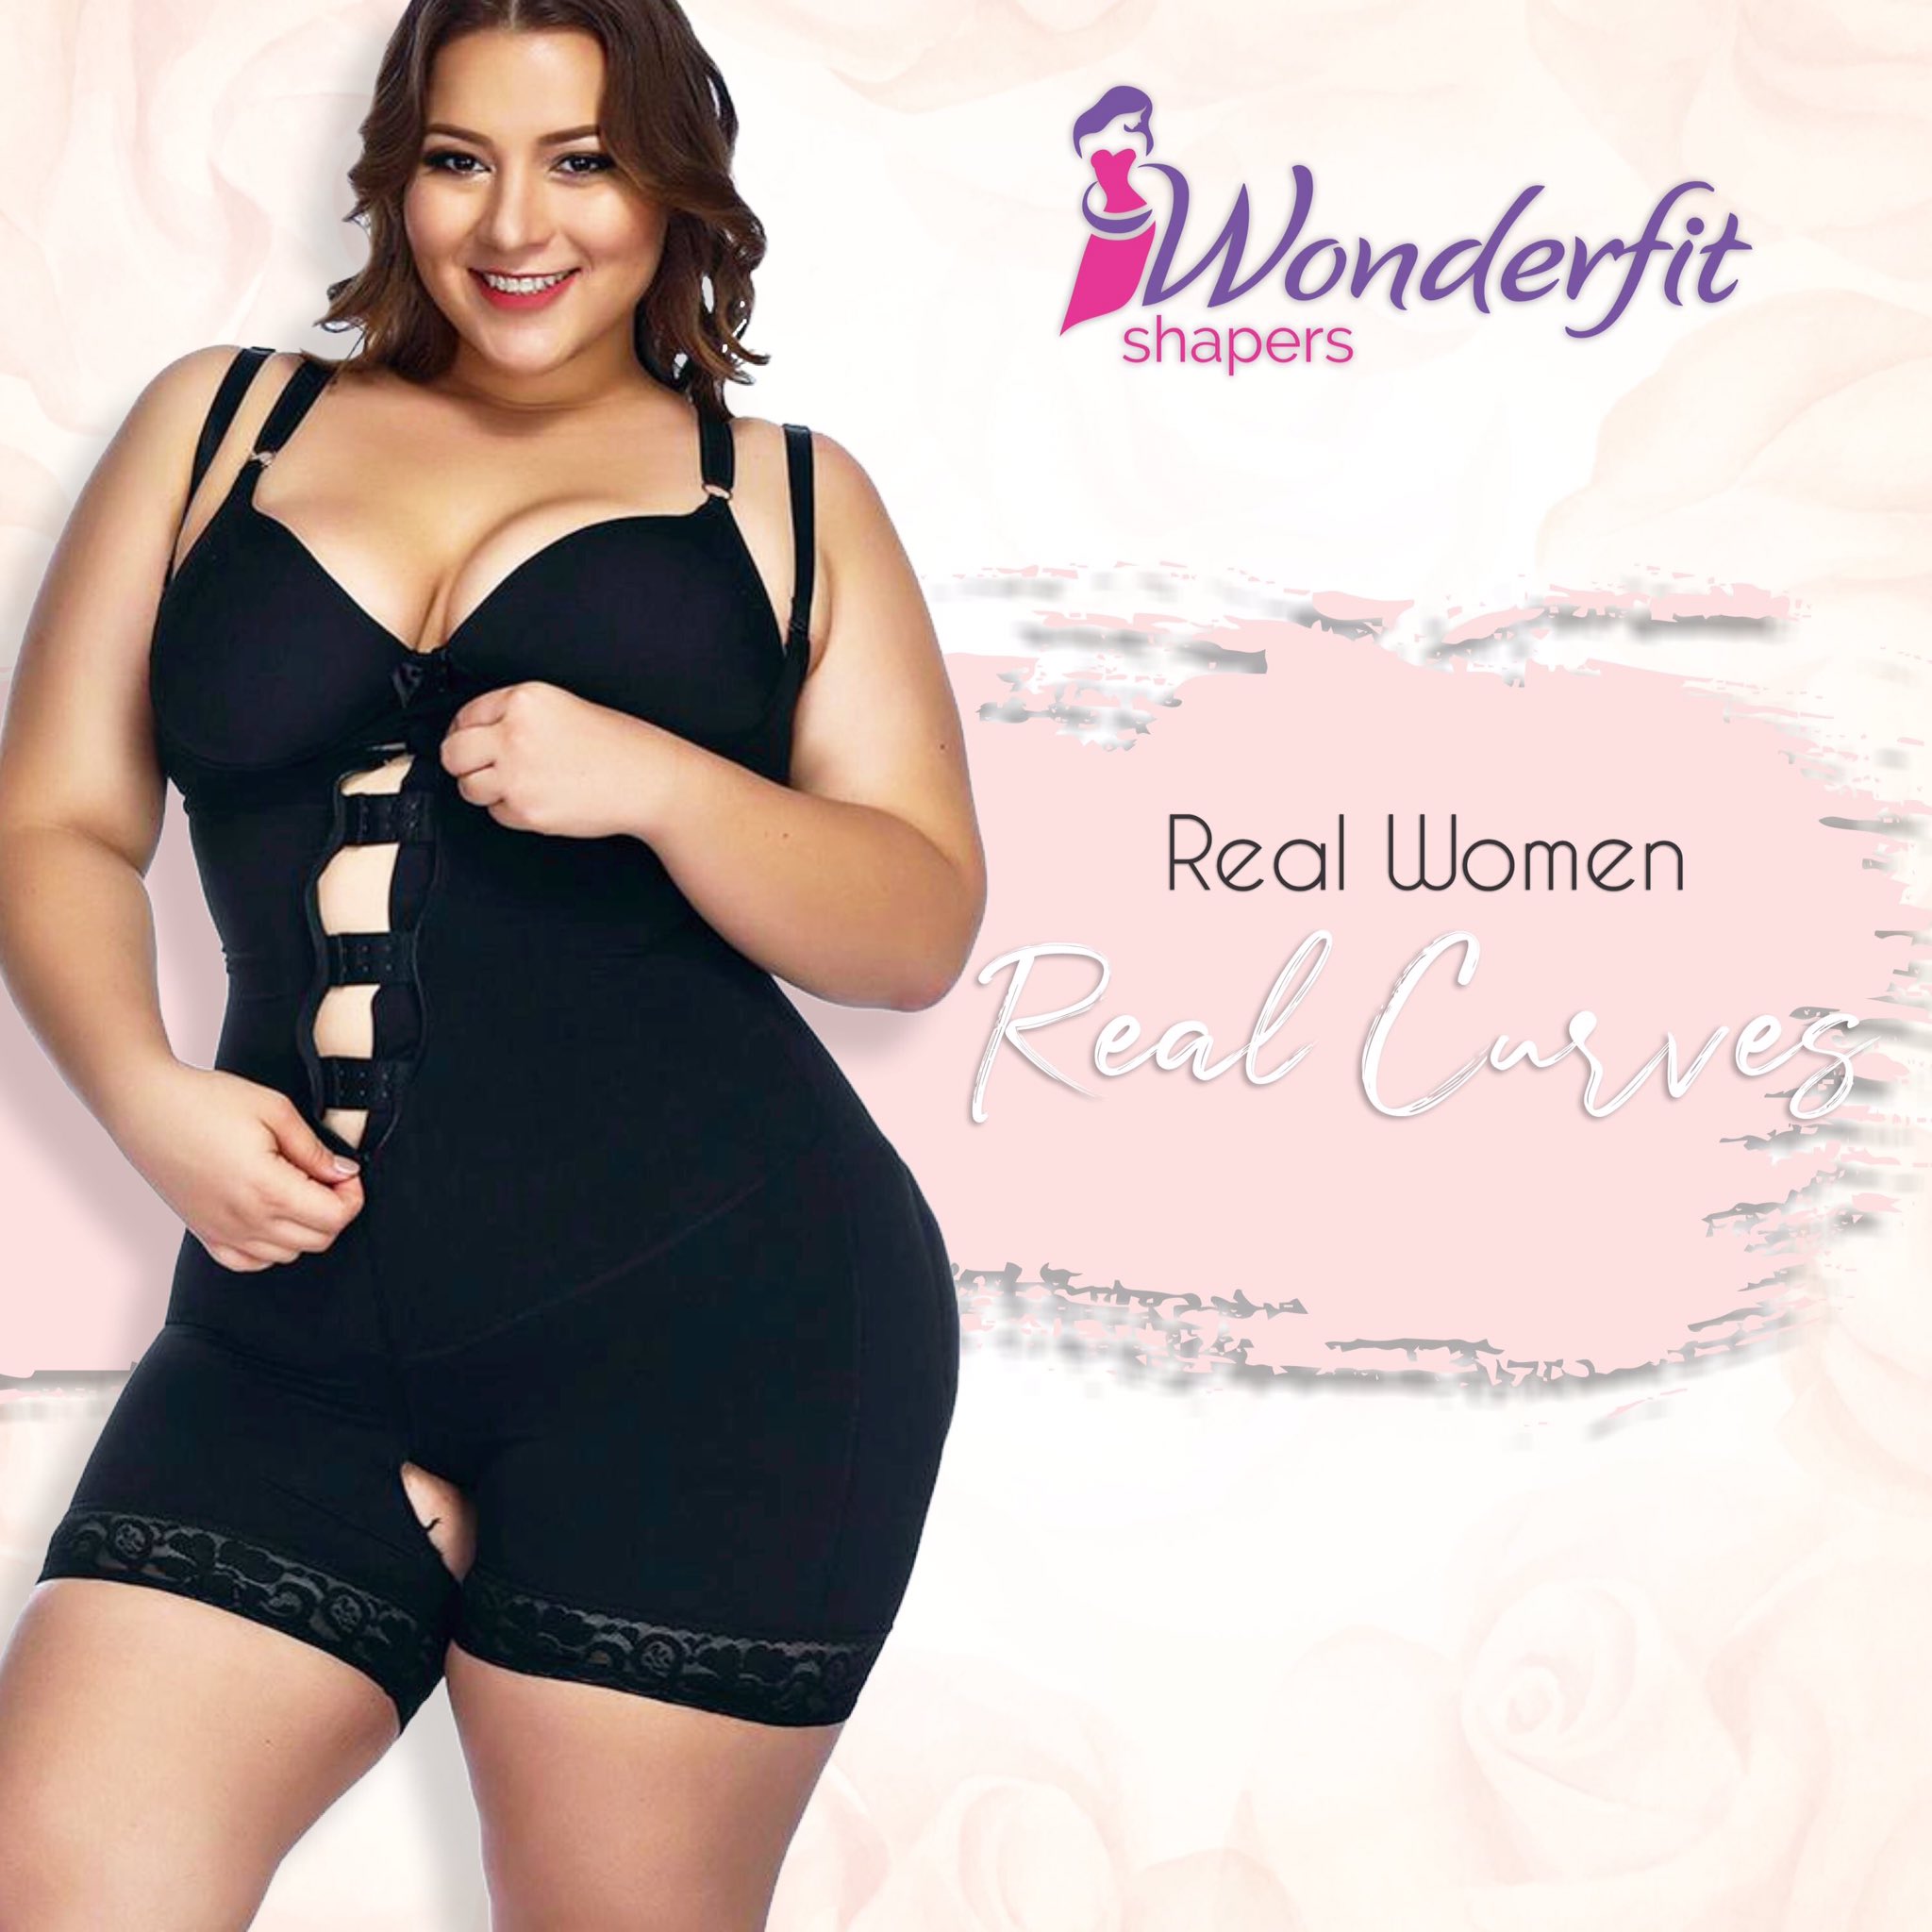 Wonderfit Shapers on X: Real women have curves! We carry all sizes! get  your body shaper at:  2293 NW 20th St Miami, Fl  33142 ☎️ 305-636-1555   customerservice@wonderfitshapers.com #plussizefashion